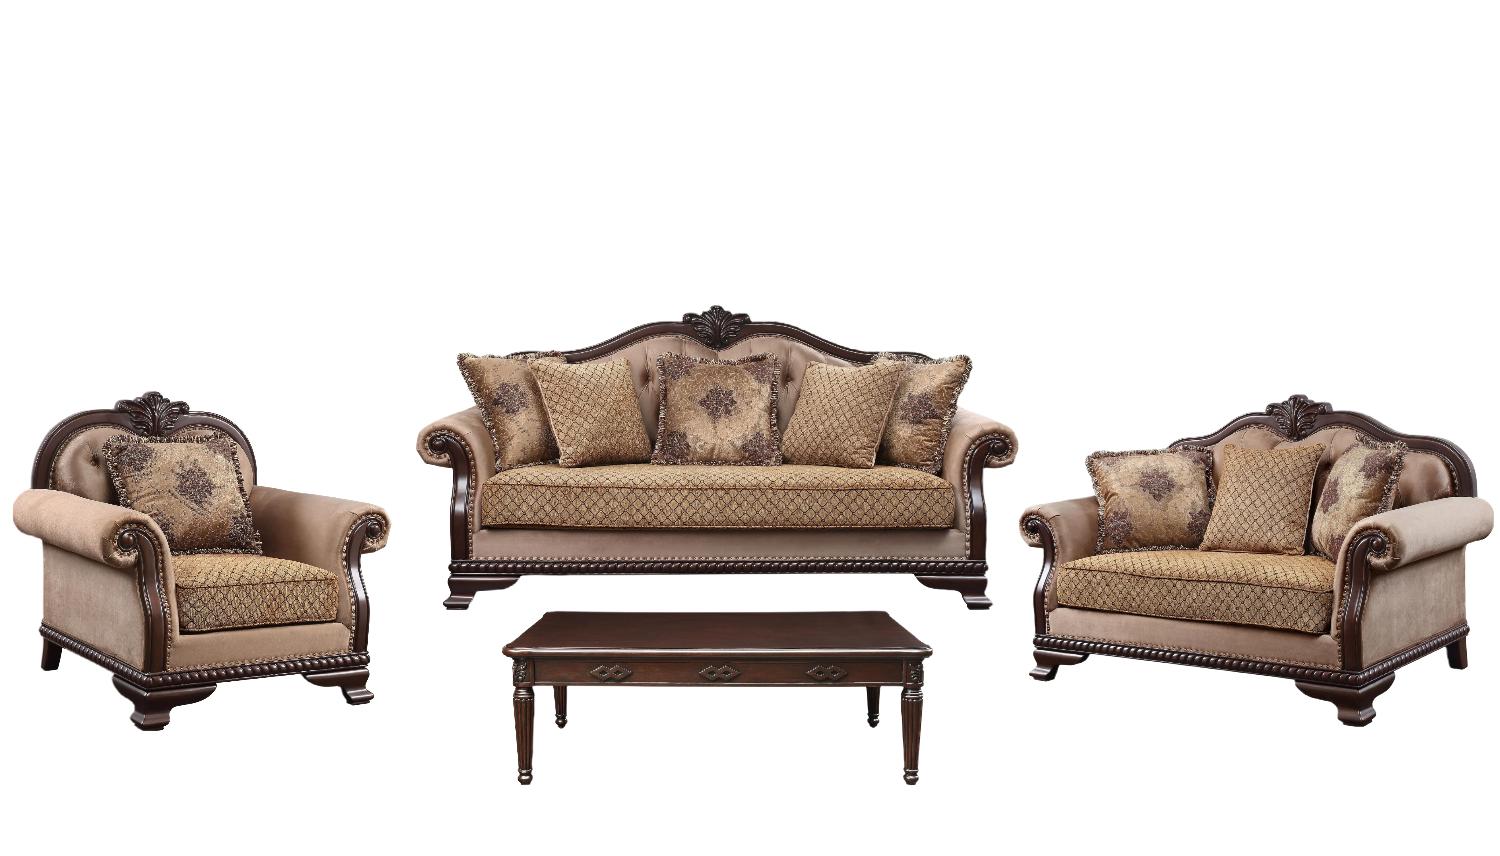 Classic Sofa Loveseat Chair and Coffee Table Chateau De Ville 58265-4pcs in Tan Fabric